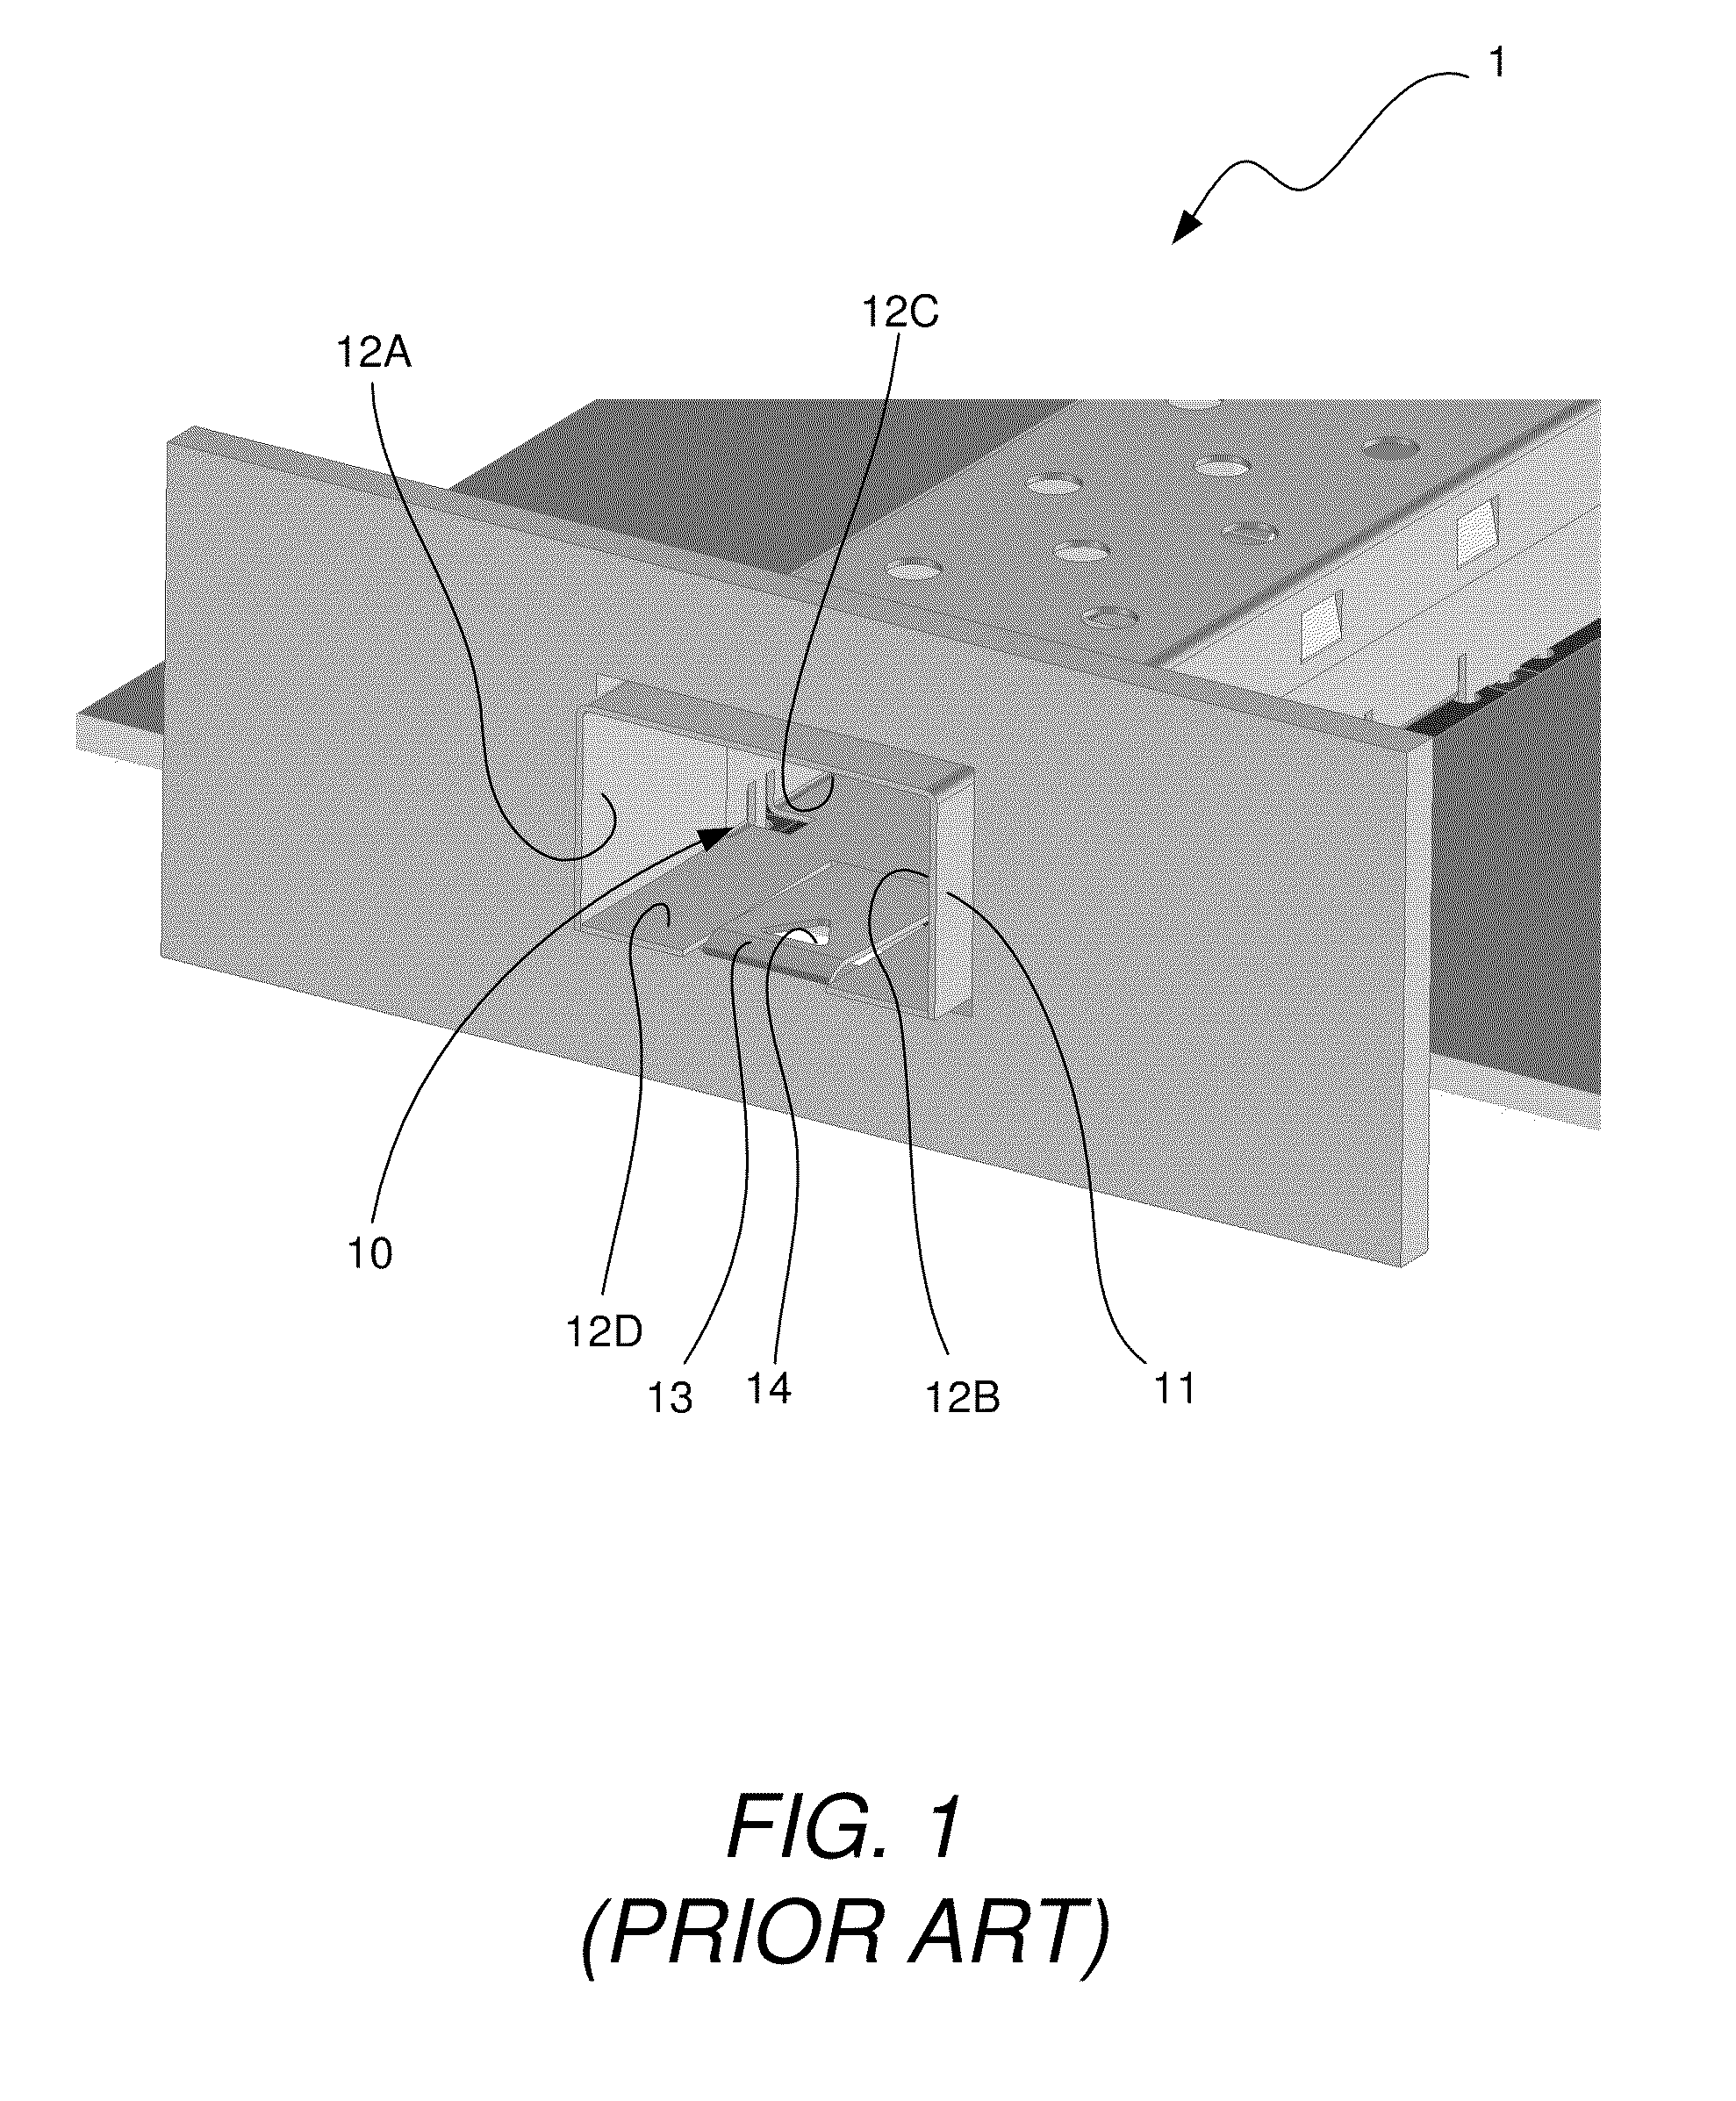 Optical transceiver module having a latching bail mechanism that uses a cam lock configuration